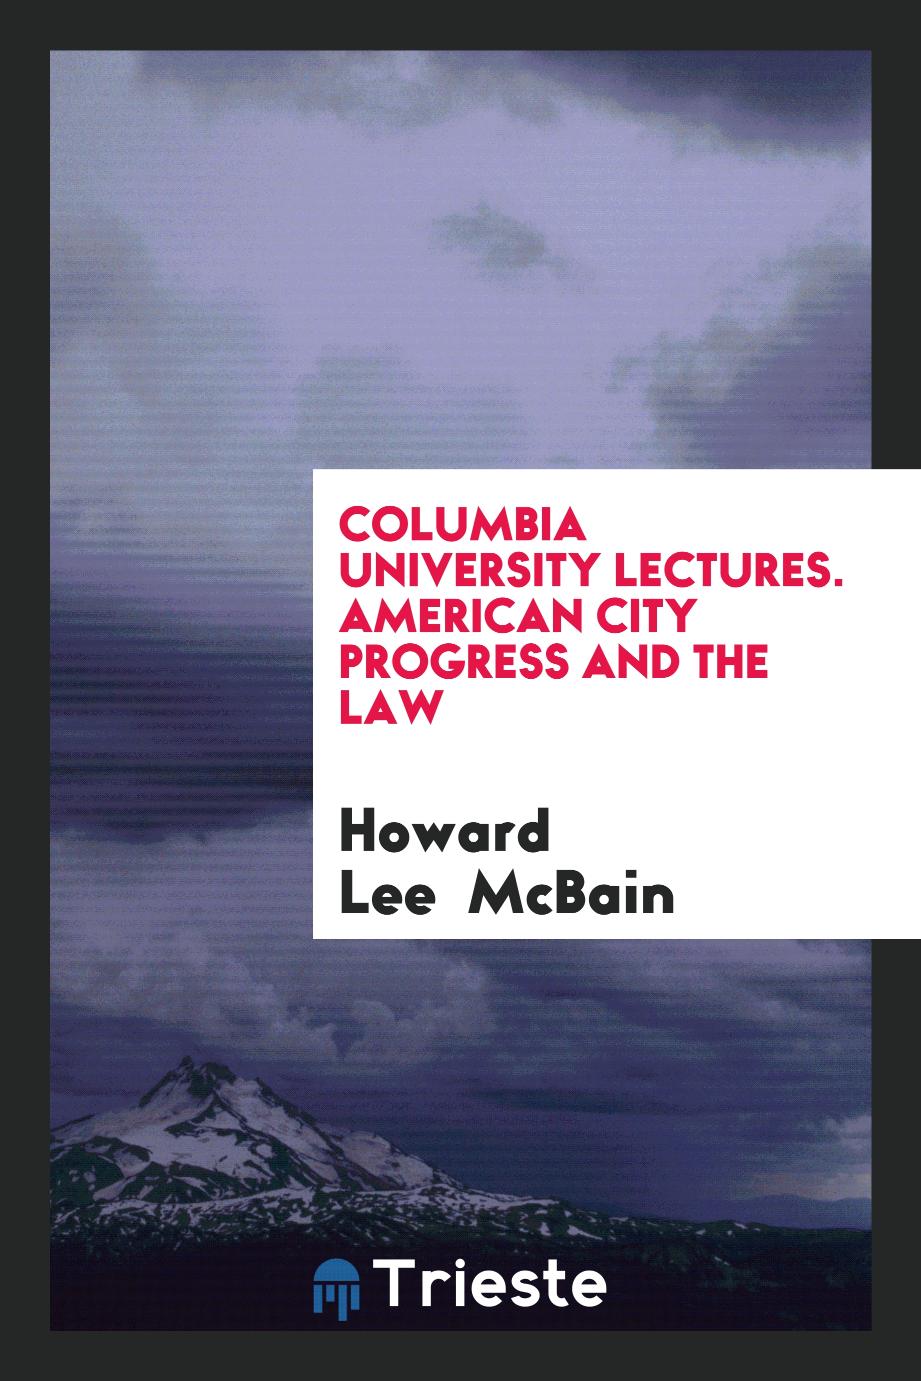 Columbia University Lectures. American City Progress and the Law